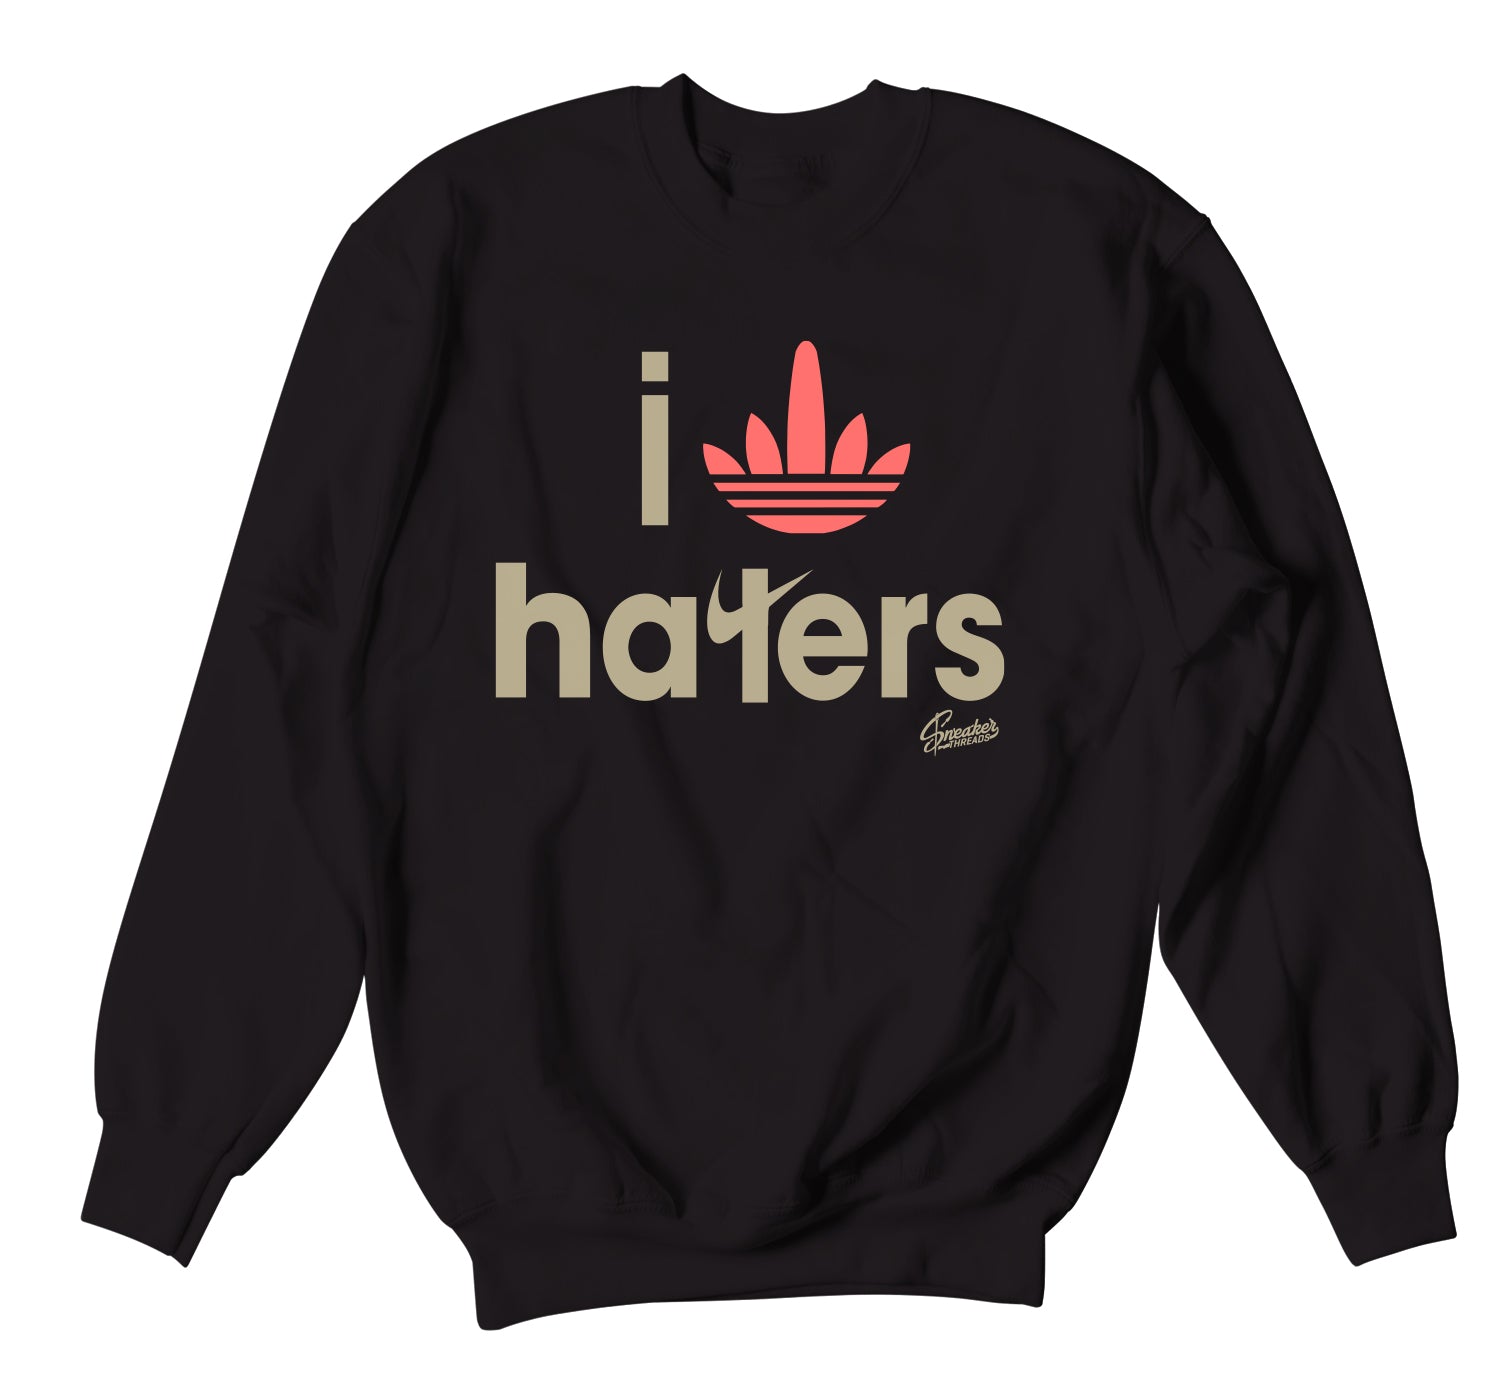 Sand Taupe 350 Sweater - Haters - Black